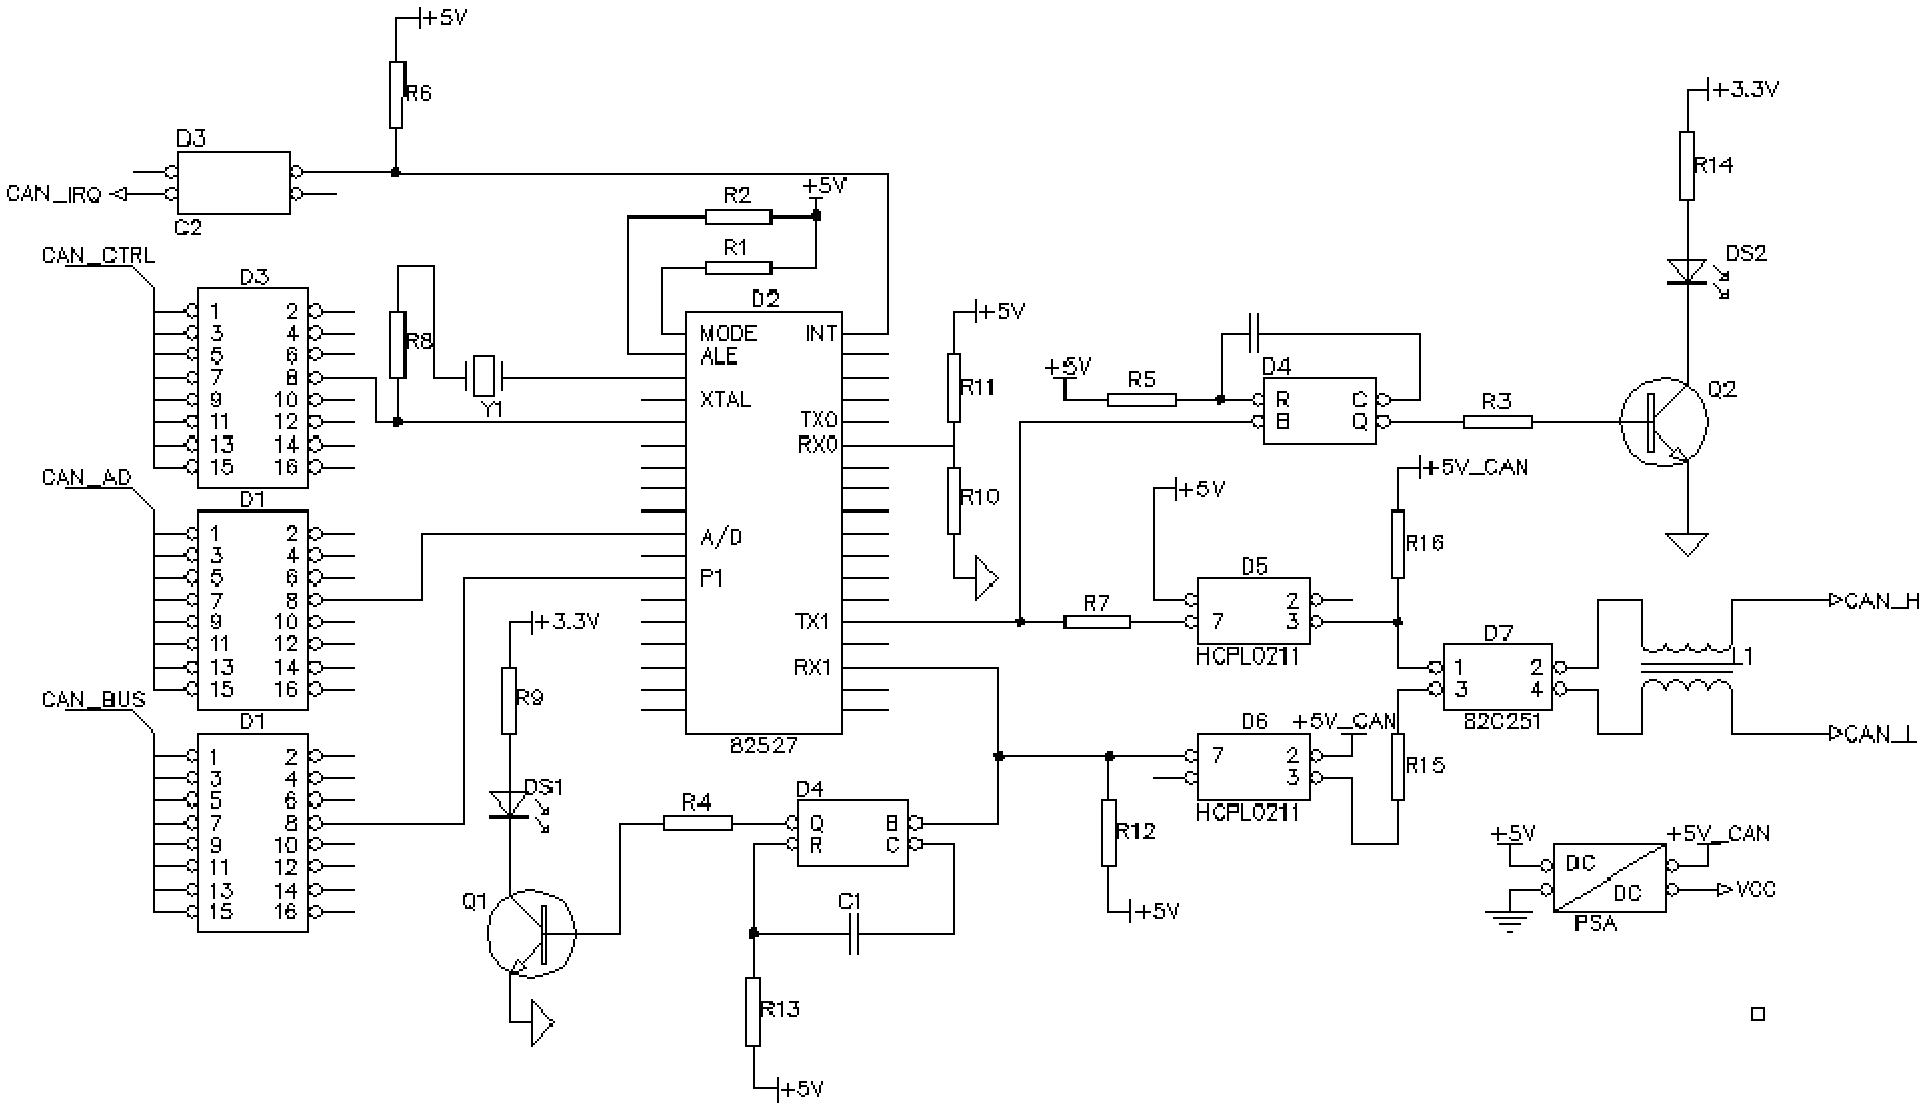 Controller area network (CAN)-control-based auxiliary control unit for locomotive